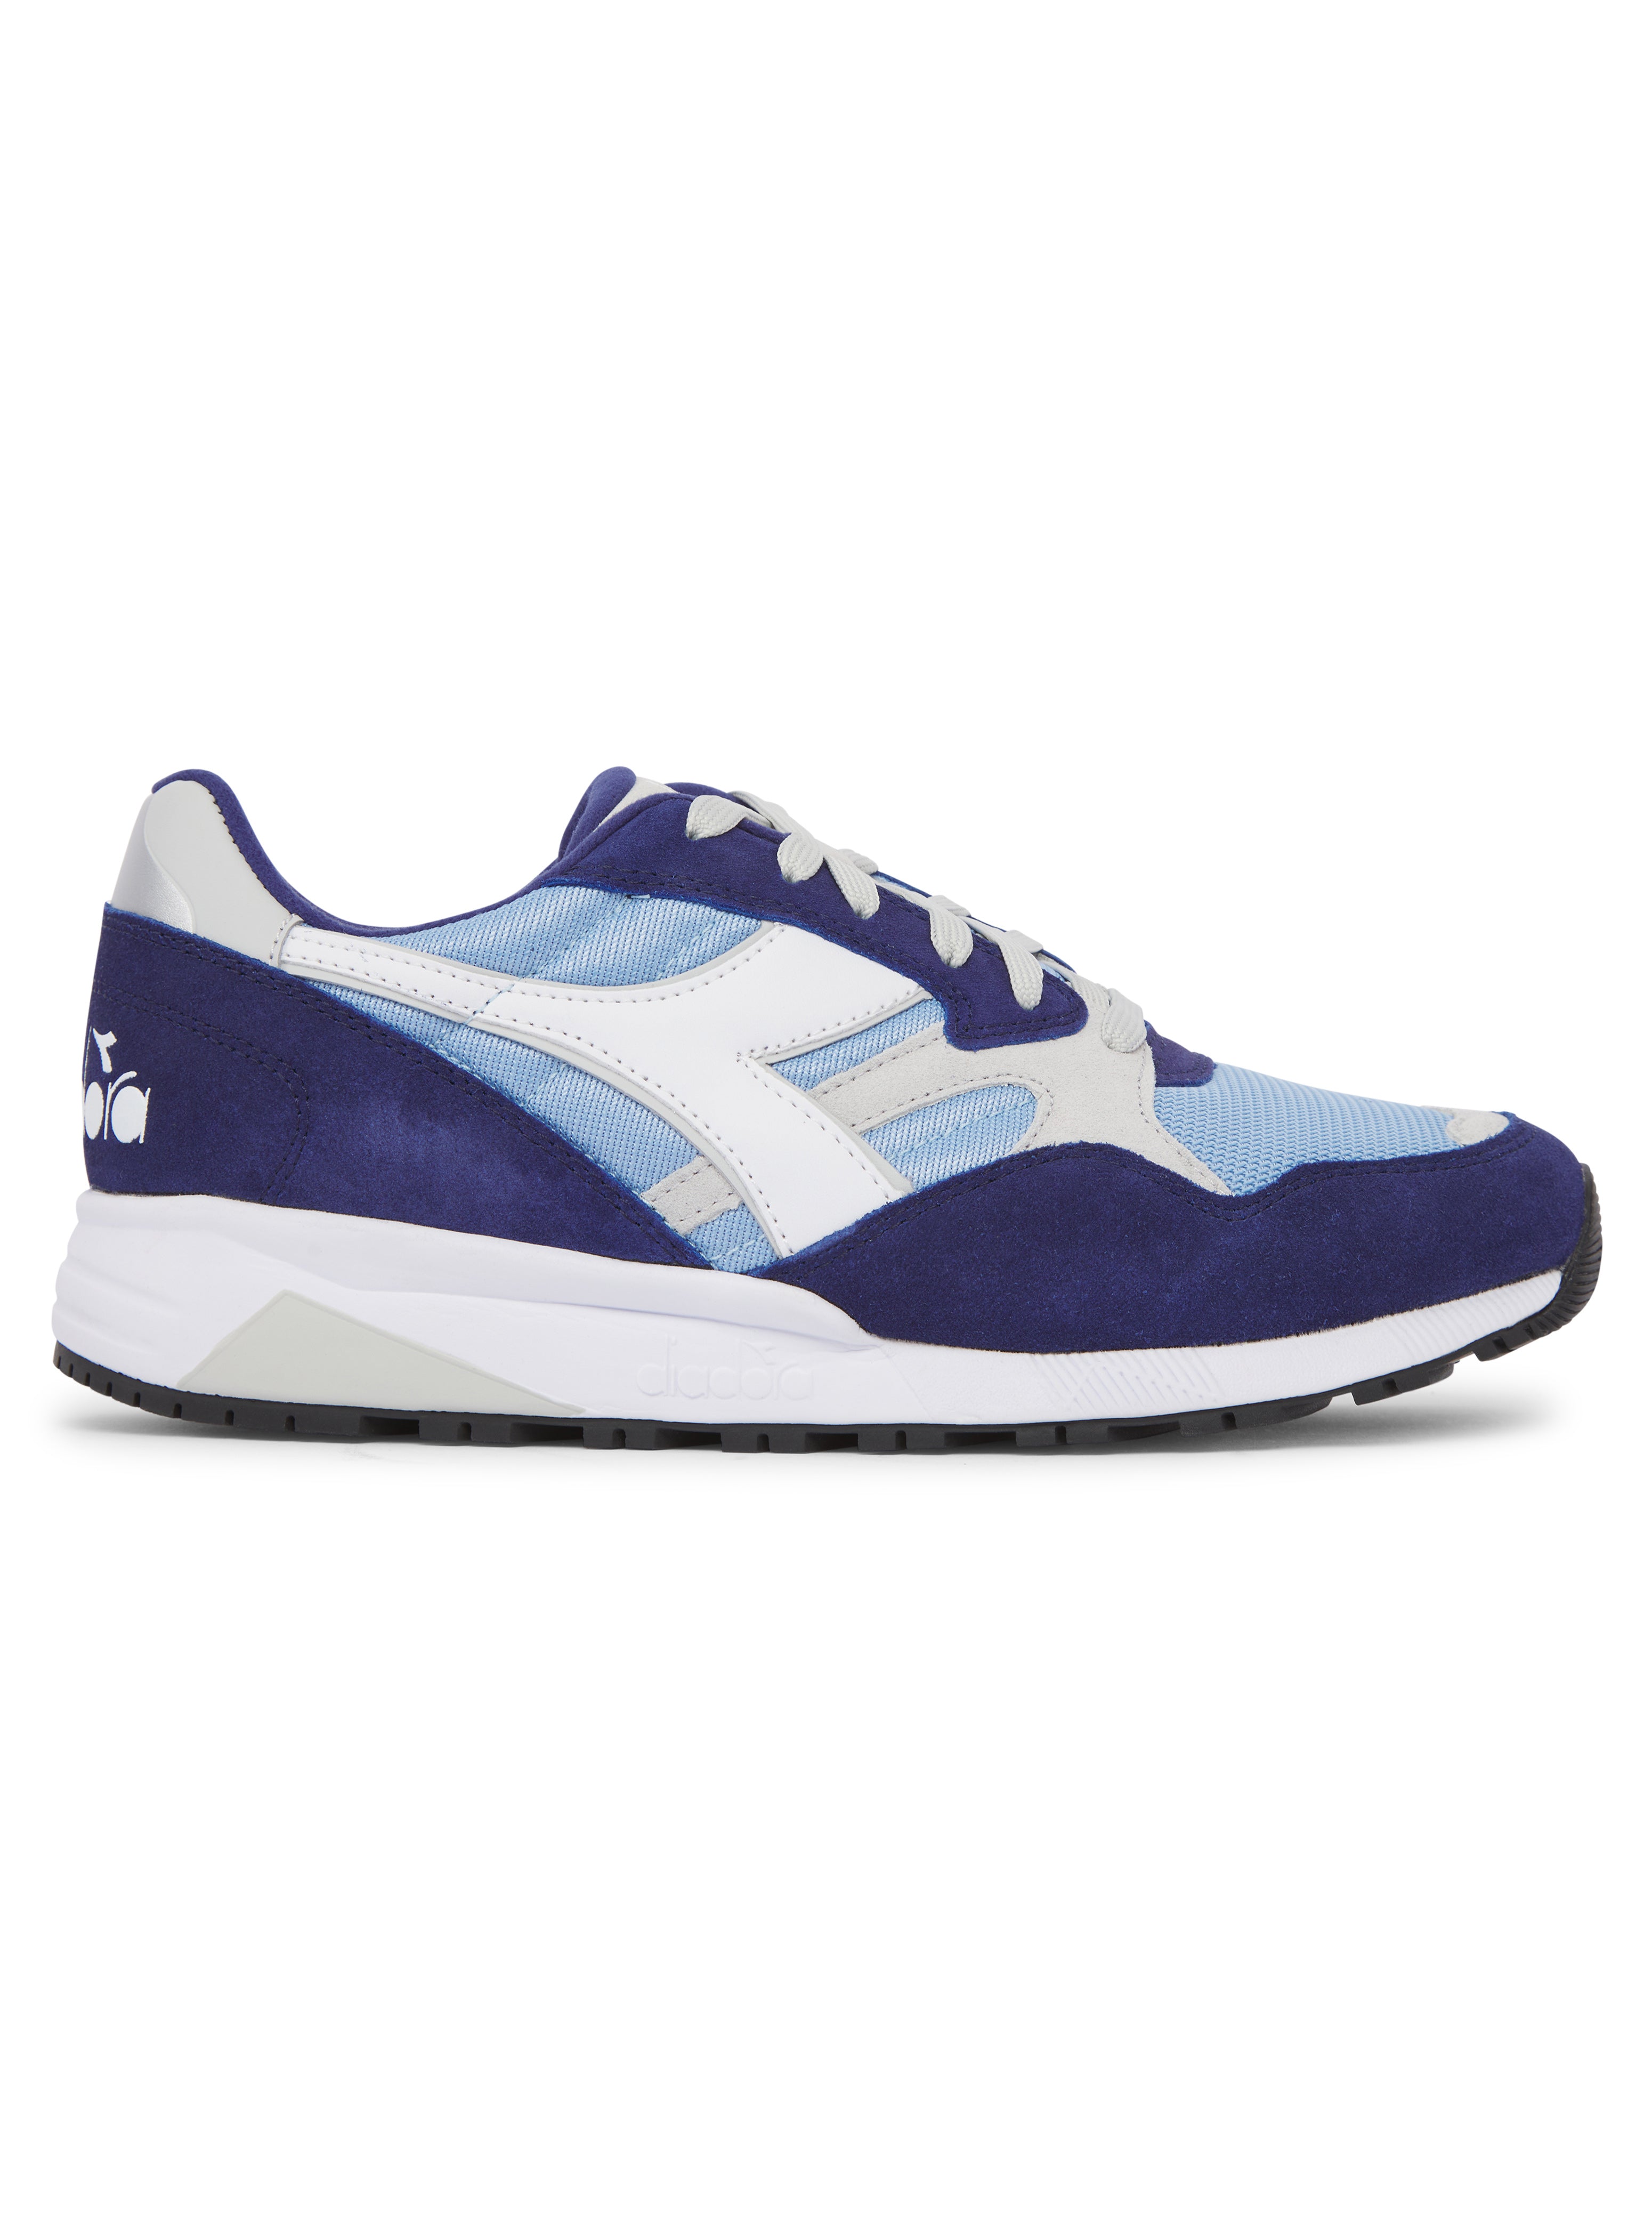 Load image into Gallery viewer, Diadora N902 Trainer Blue
